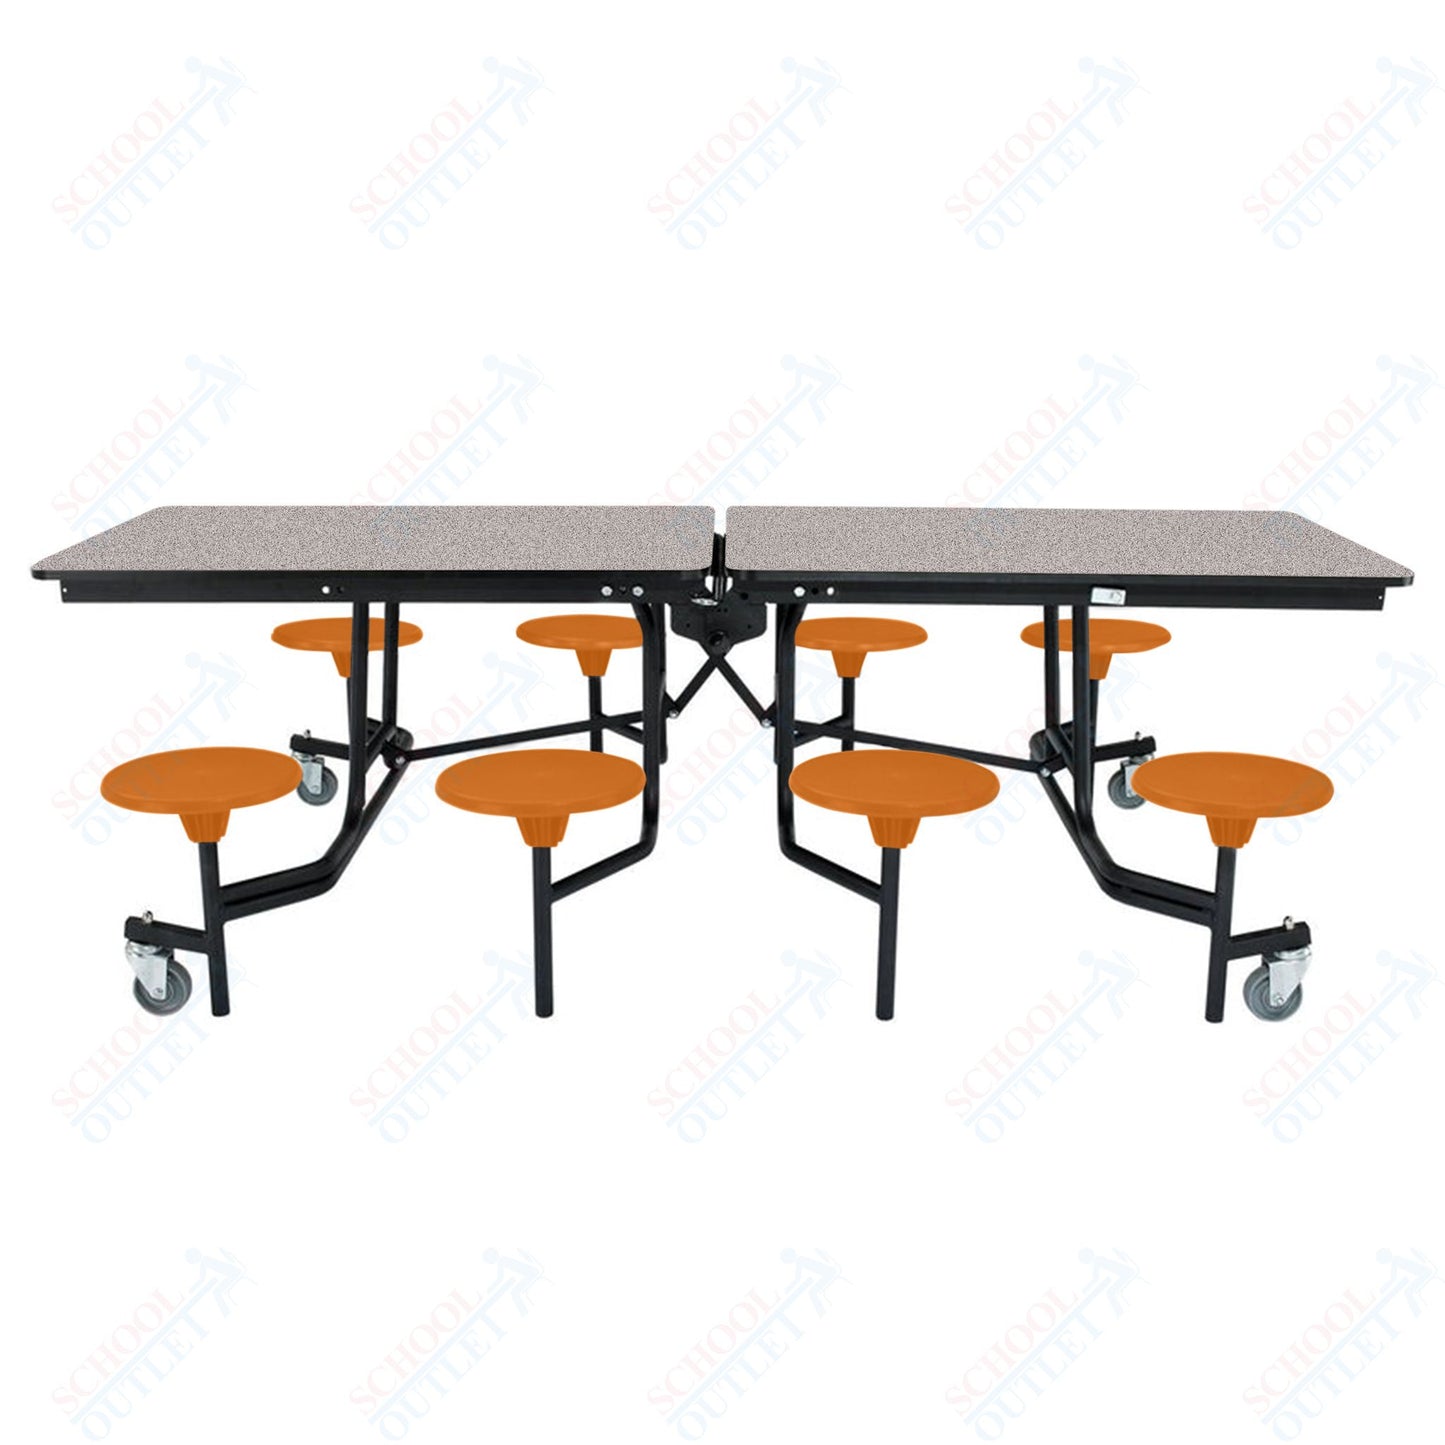 NPS Mobile Cafeteria Table - 30" W x 8' L - 8 Stools - Plywood Core - T-Molding Edge - Chrome Frame